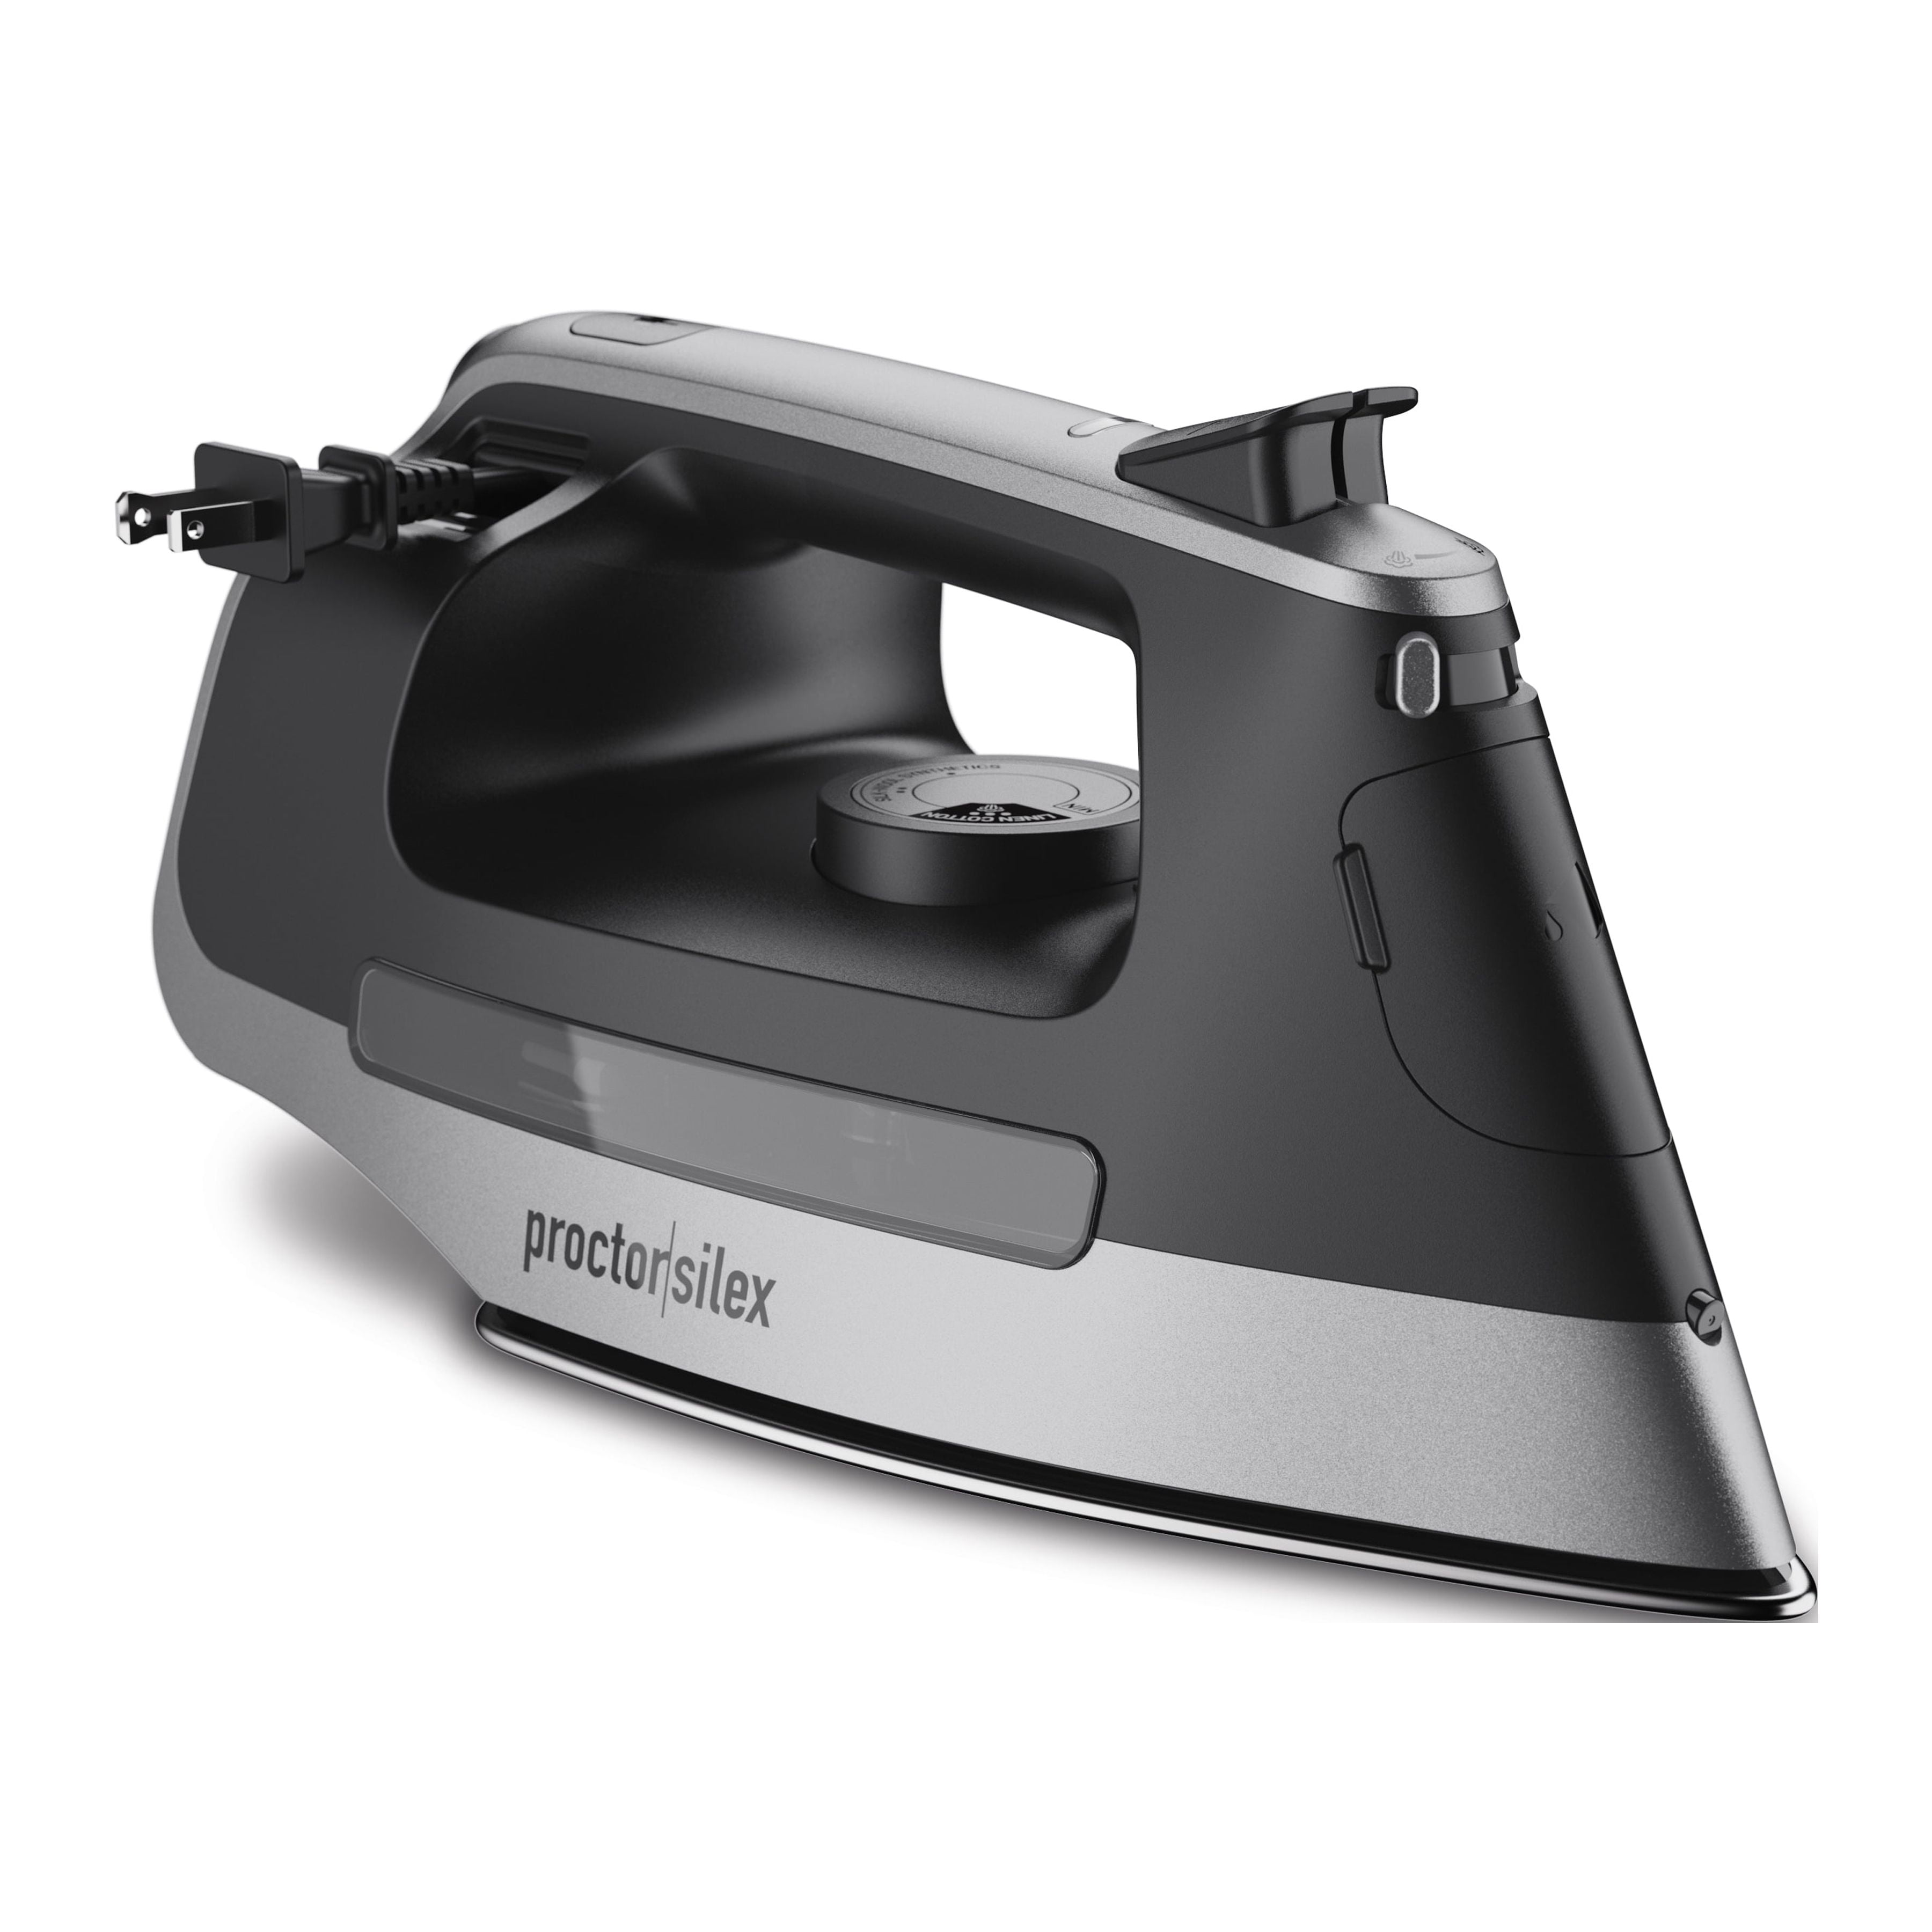 Proctor Silex Steam Iron with Retractable Cord, Stainless Steel Soleplate,  Black and Silver, 14250 